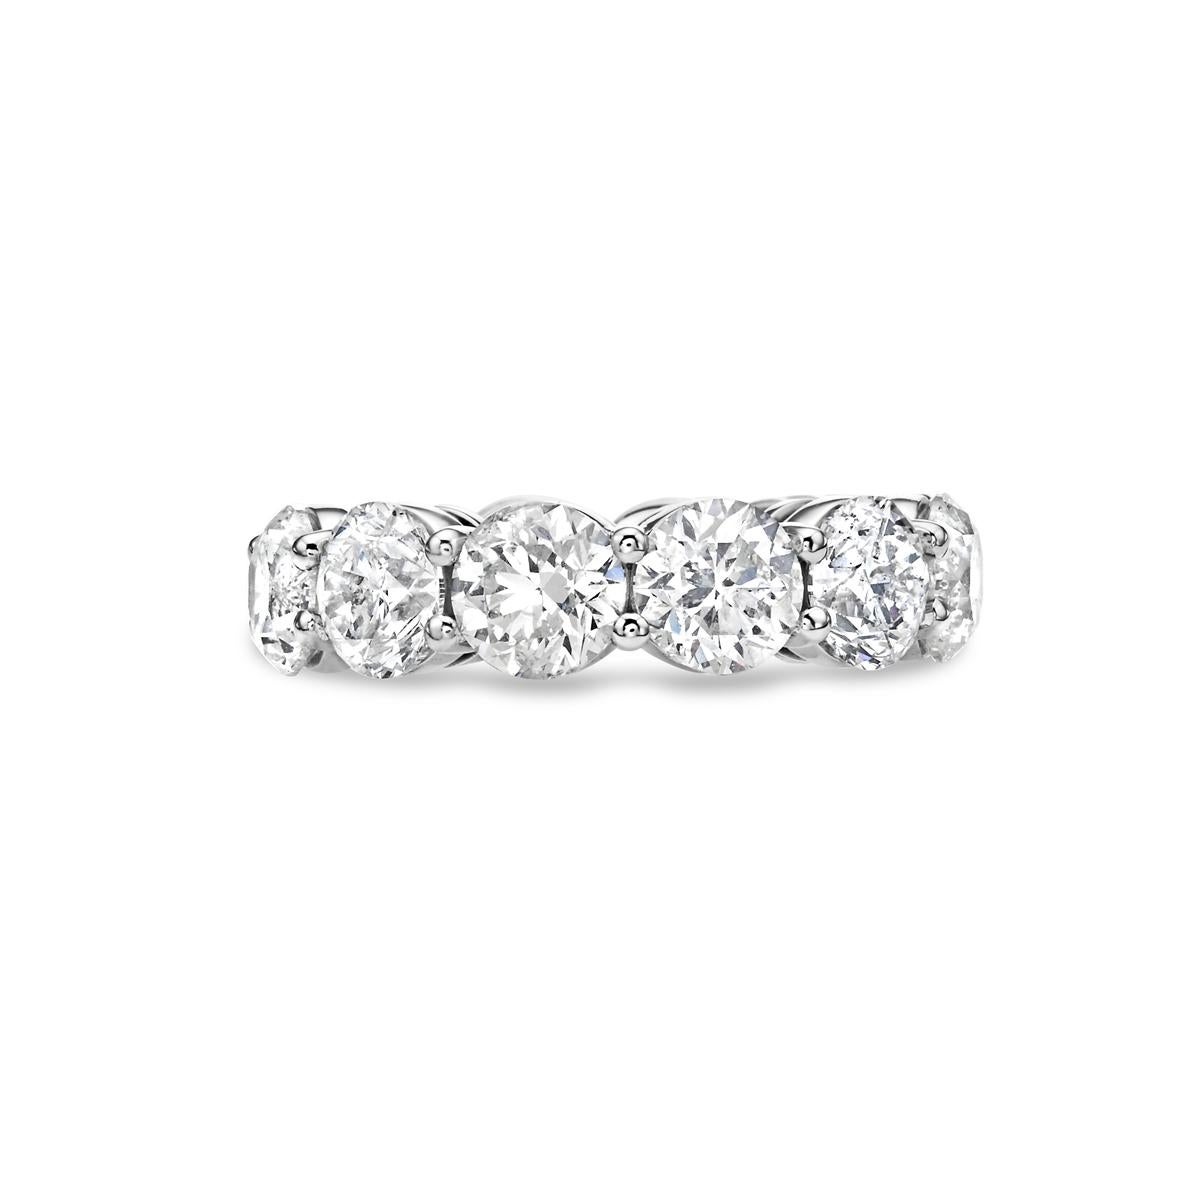 This diamond eternity band features 12 round diamonds 1+ ct. each. Weighing a total of 11.75 carats set in Platinum. A must see!
Approximately G - H Color and I1 - I2 clarity Completely clean to the eye.
Size 6
Available in all the sizes upon